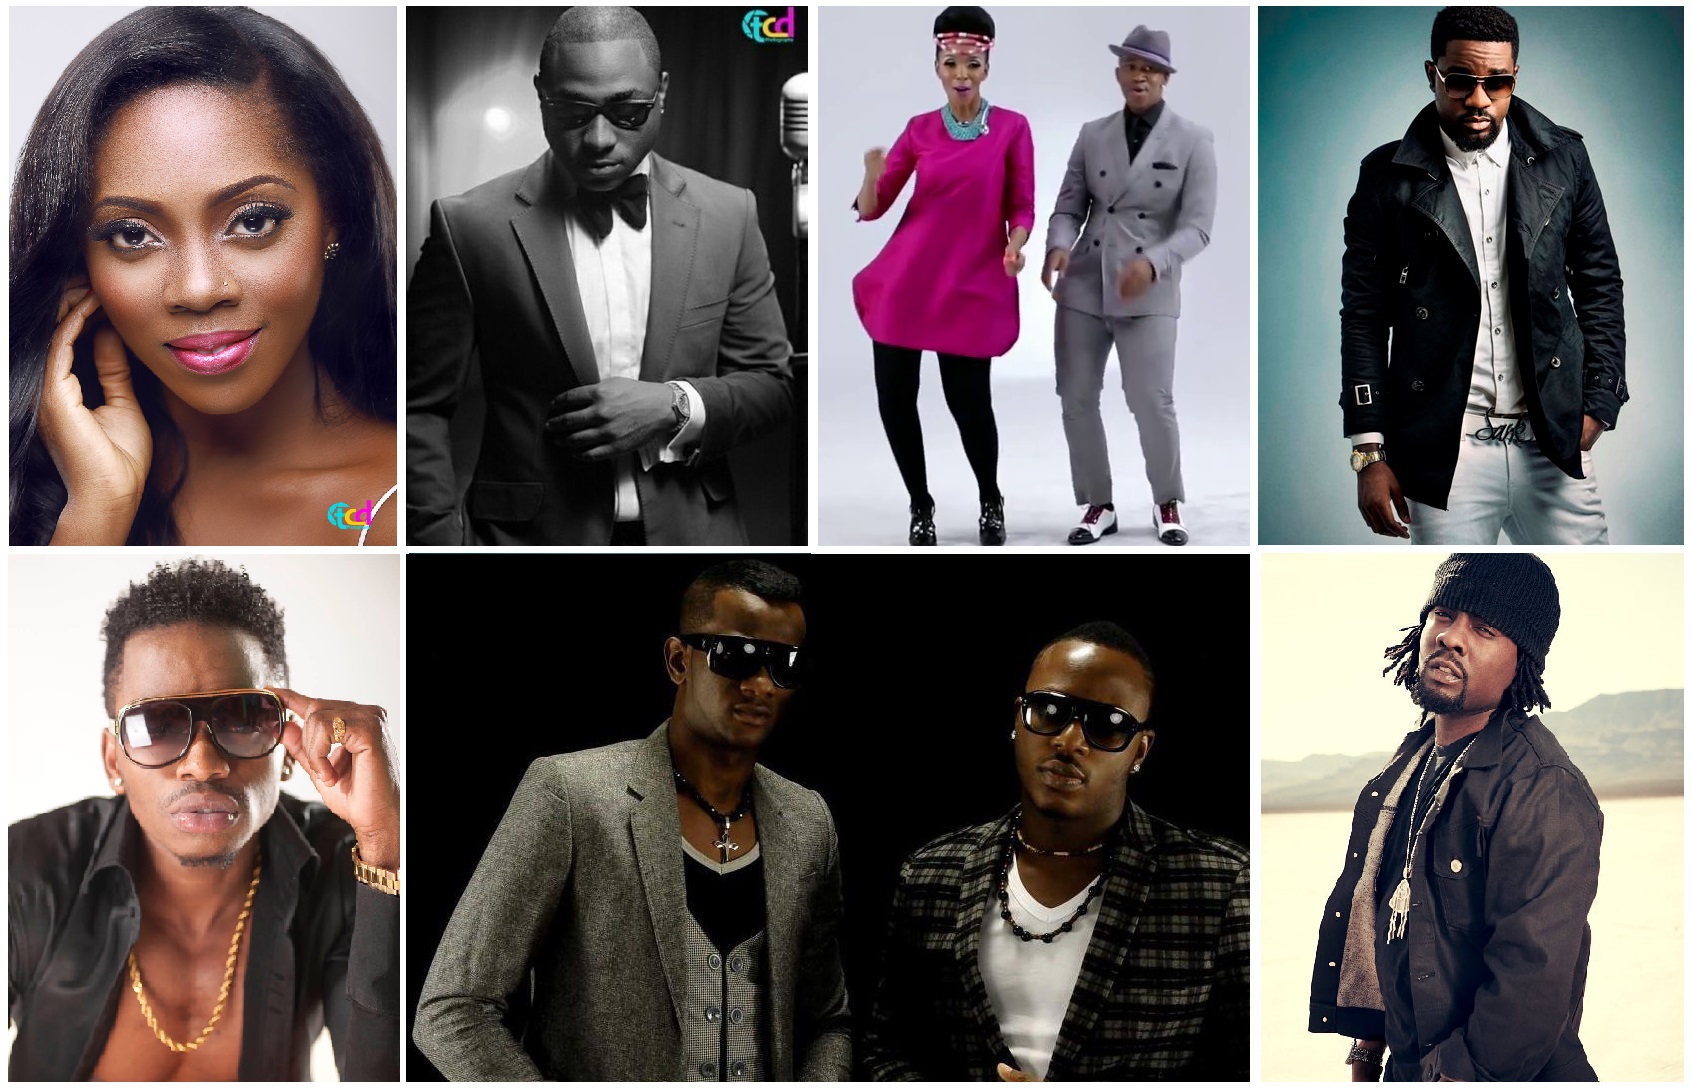 Entertainment: African Music Stars Nominated for BET U.S. Awards